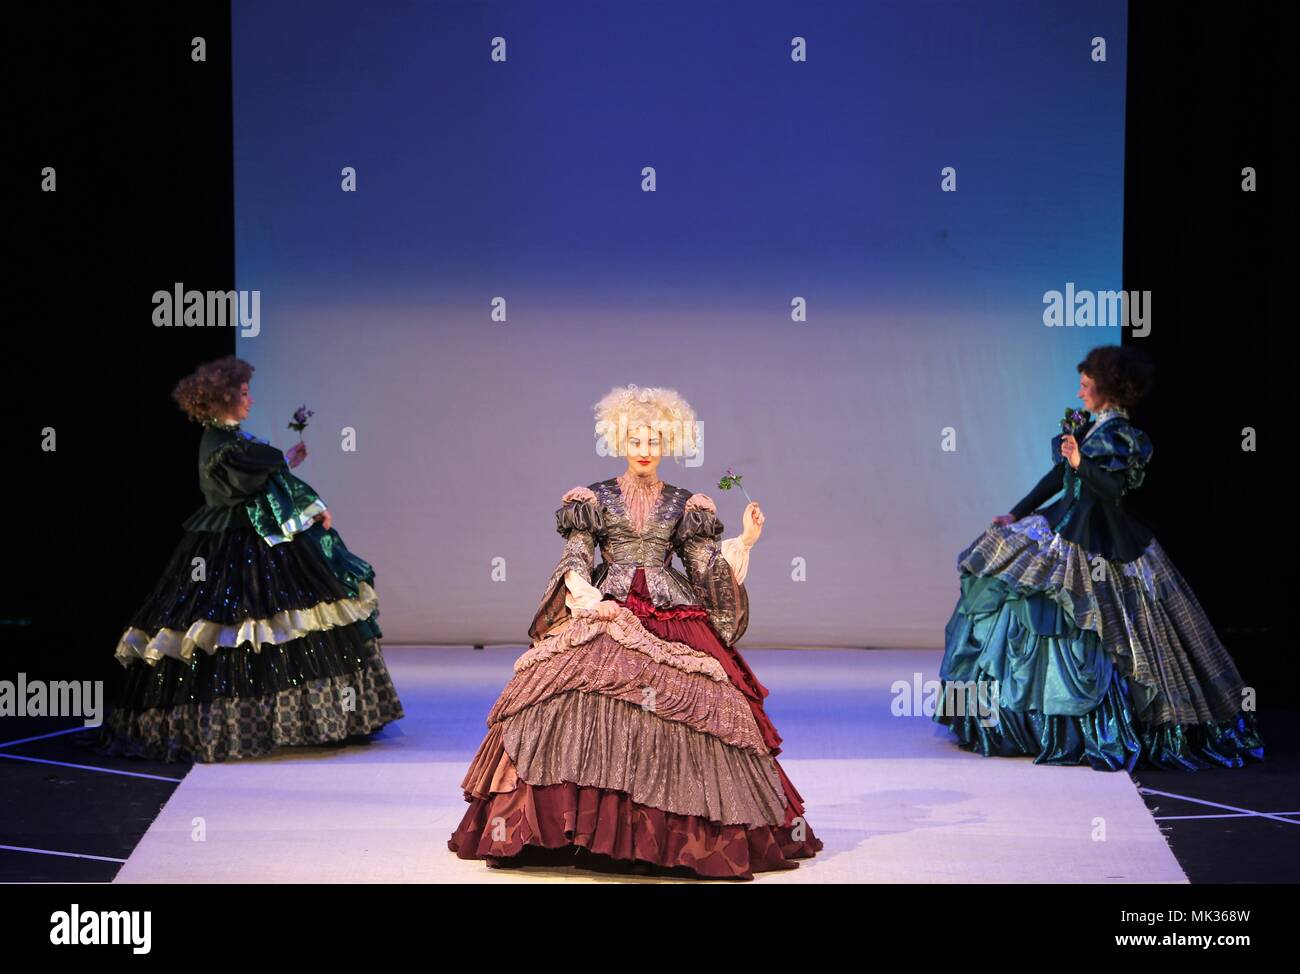 Hawalli Governorate, Kuwait. 6th May, 2018. Performers present theatrical costumes during a show in Hawalli Governorate, Kuwait, on May 6, 2018. Kuwait on Sunday held a theatrical costume show in Hawalli Governorate. Credit: Nie Yunpeng/Xinhua/Alamy Live News Stock Photo